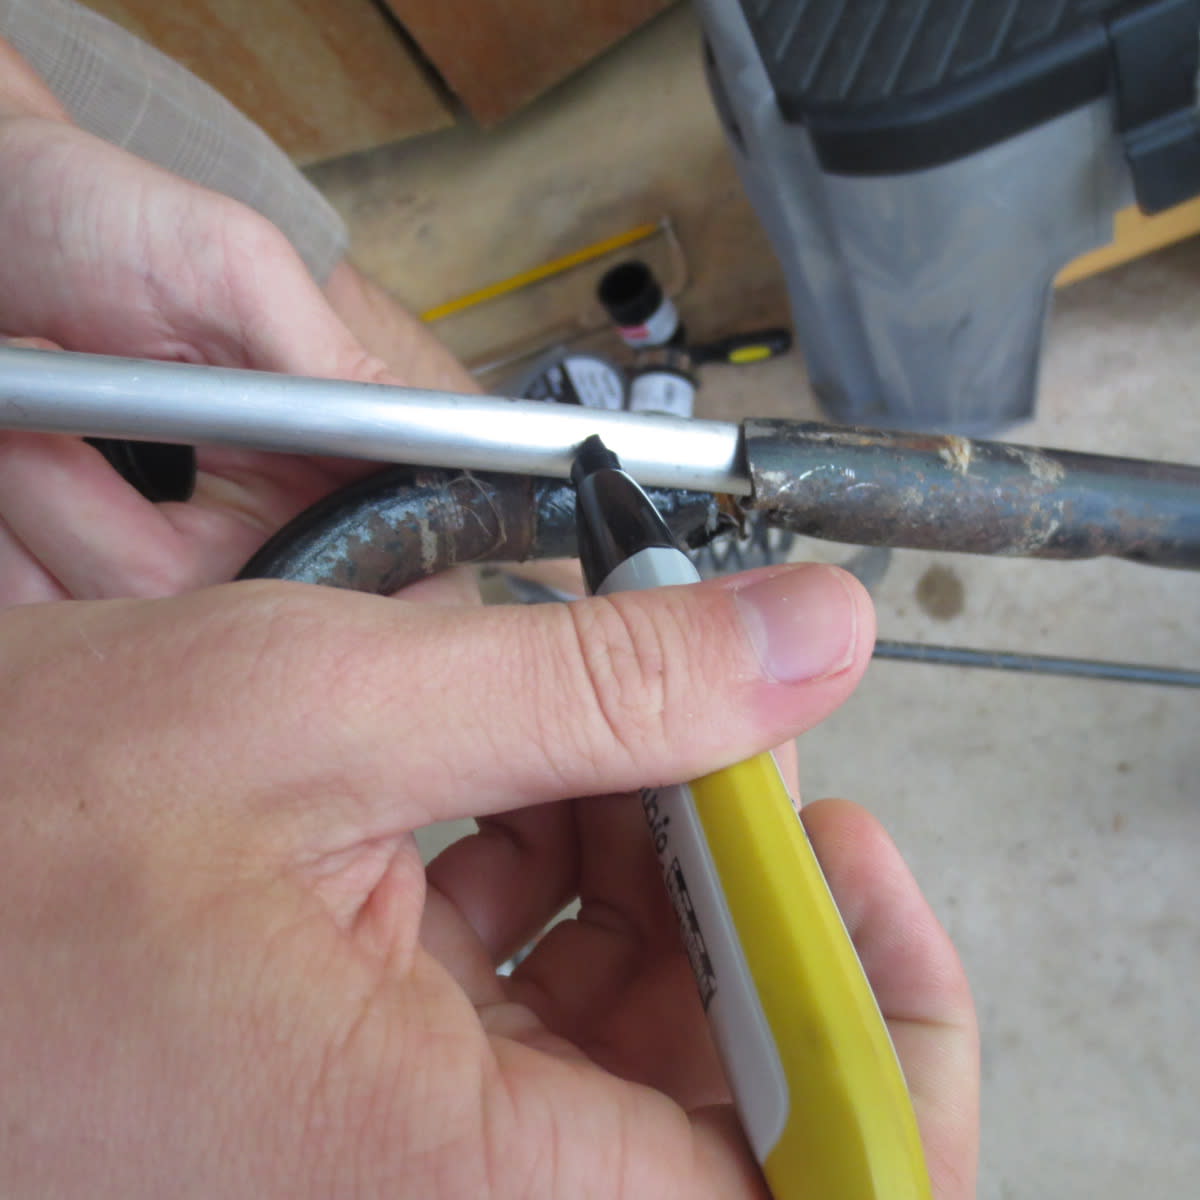 Once the rod is in as far as it will go, mark your cut area 3-4 inches past the break into the upper part of the handle. (Fig. 4)